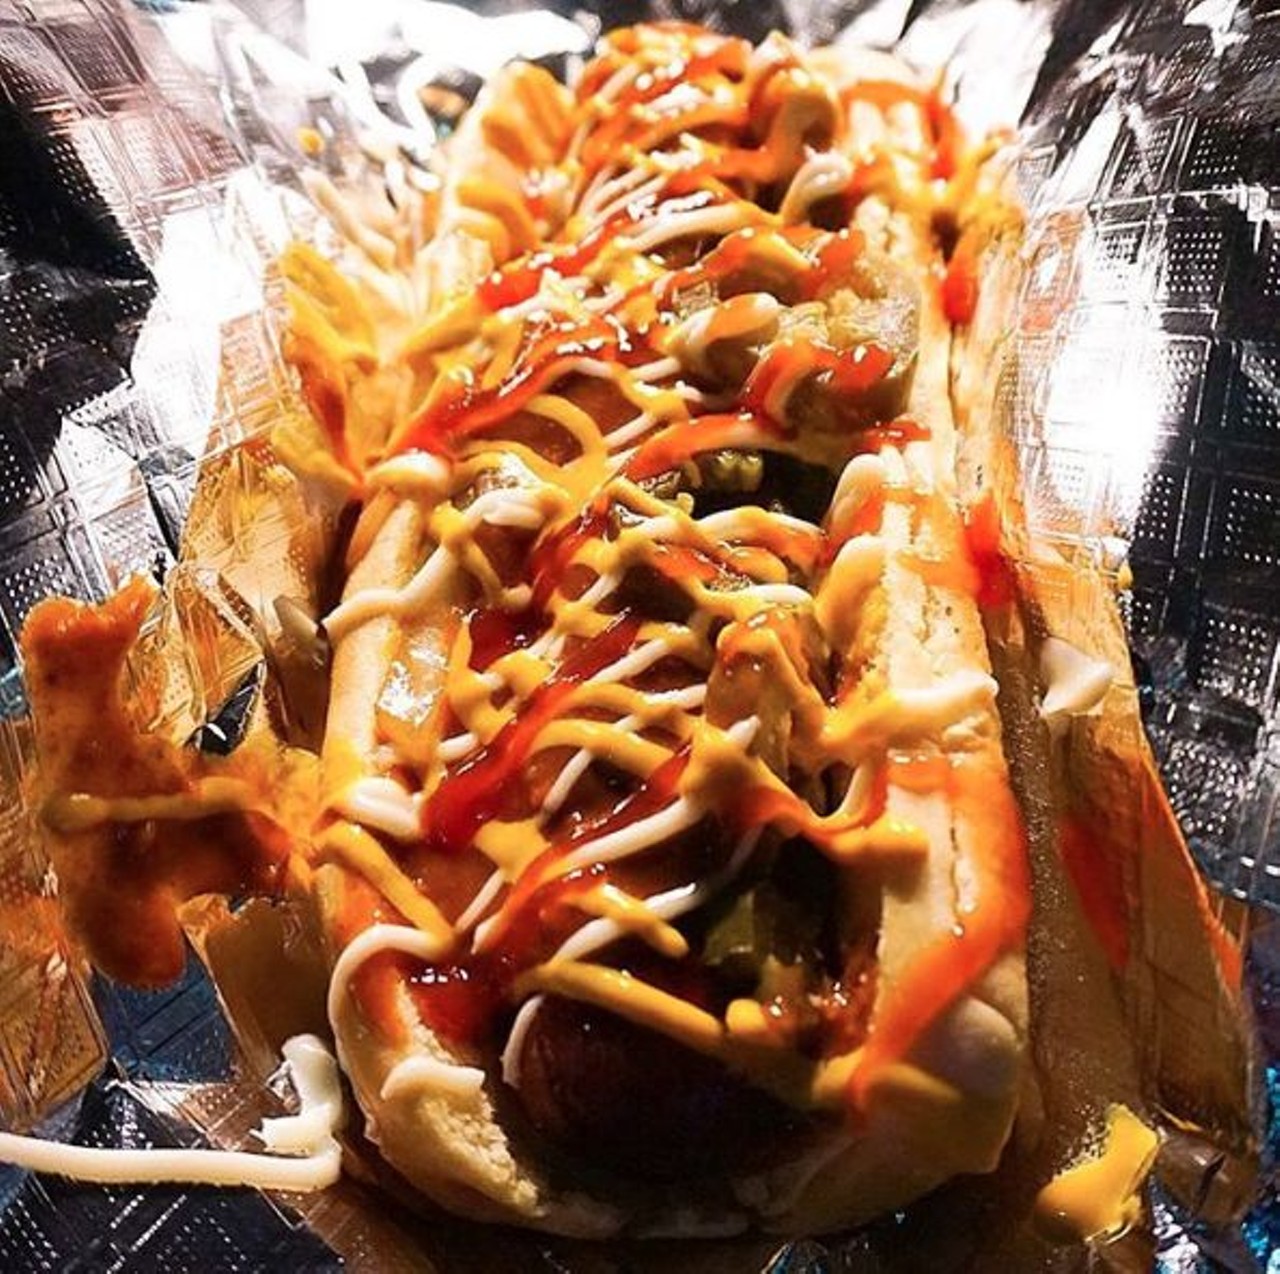 Alamo Hot Dog Co.
Multiple locations, (210) 831-2409, facebook.com
When your dogs are barking from a night of dancing, order up a few hot dogs, or at least one wrapped in bacon. Open until 2 a.m. Tuesday through Saturday.
Photo via Instagram, miss_eater_tx